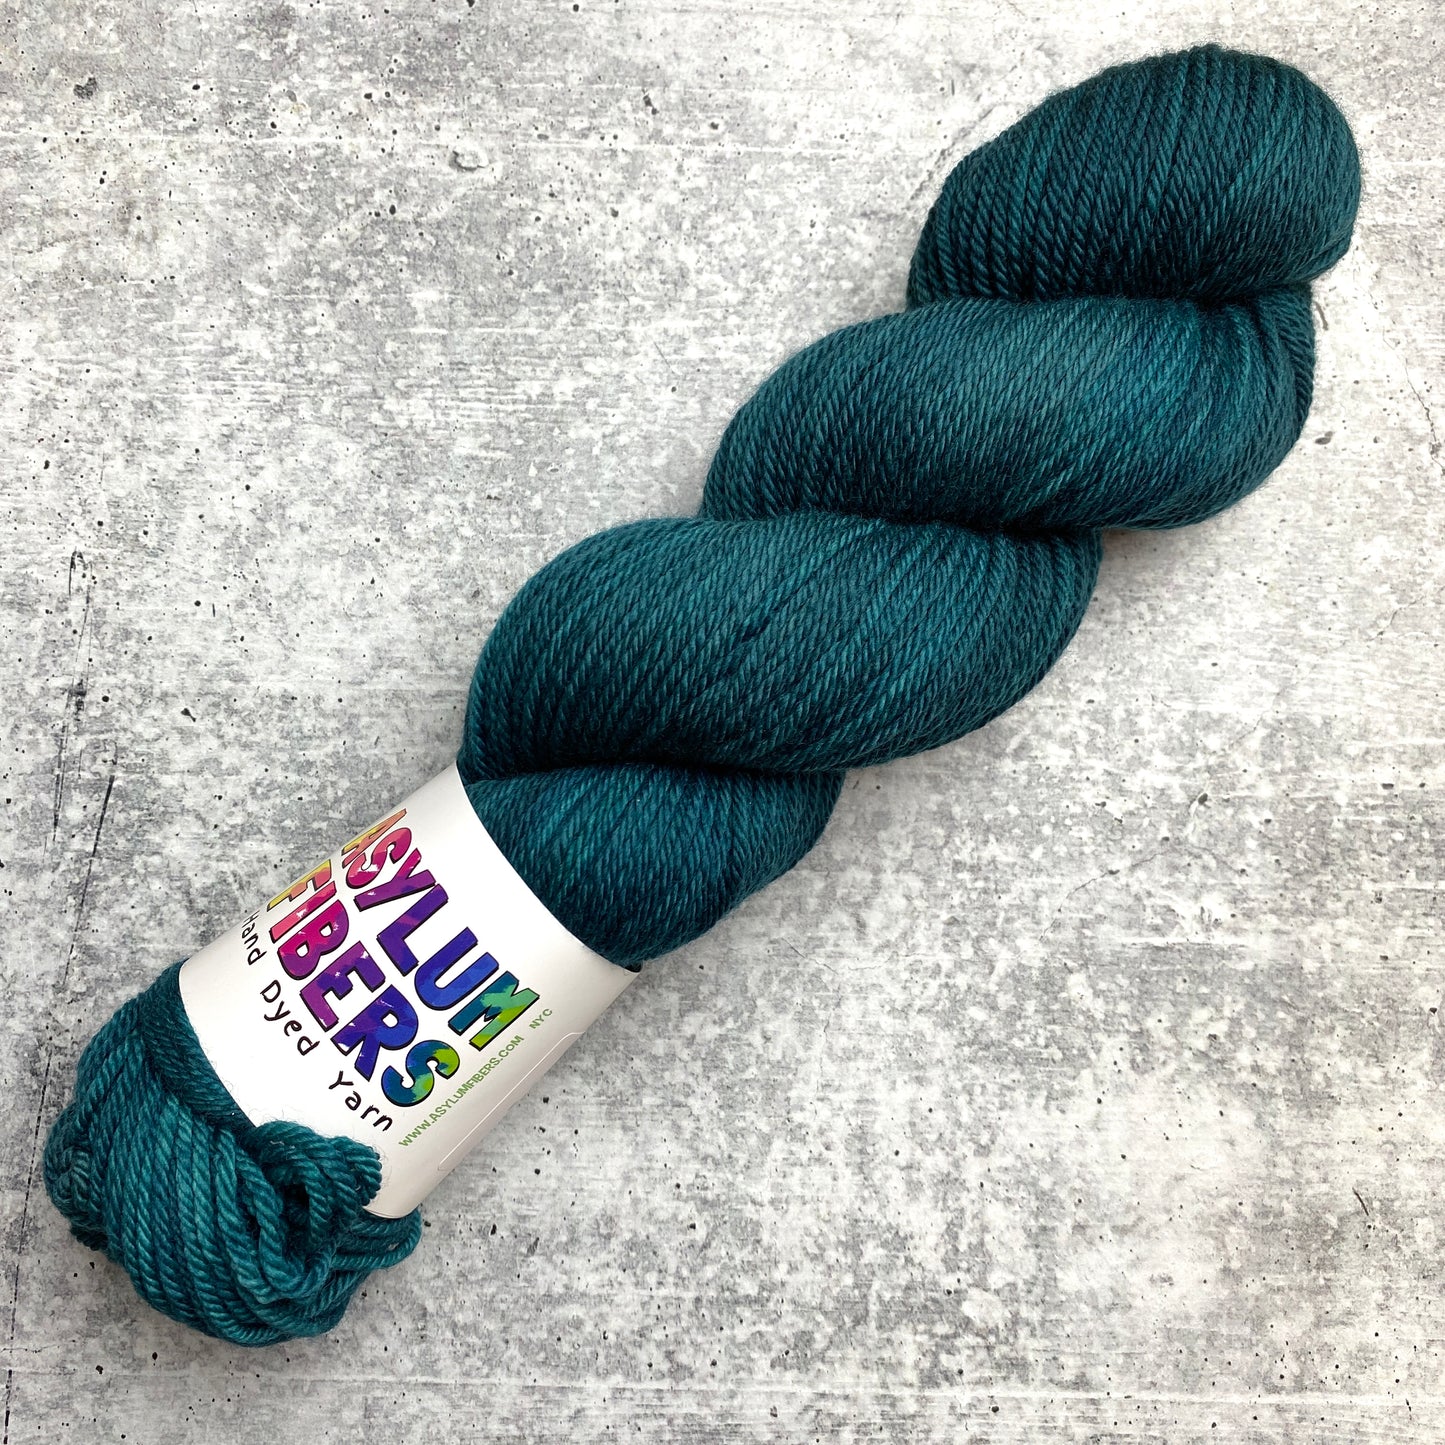 Teal My Heart on Organic Merino Worsted - Ready to Ship